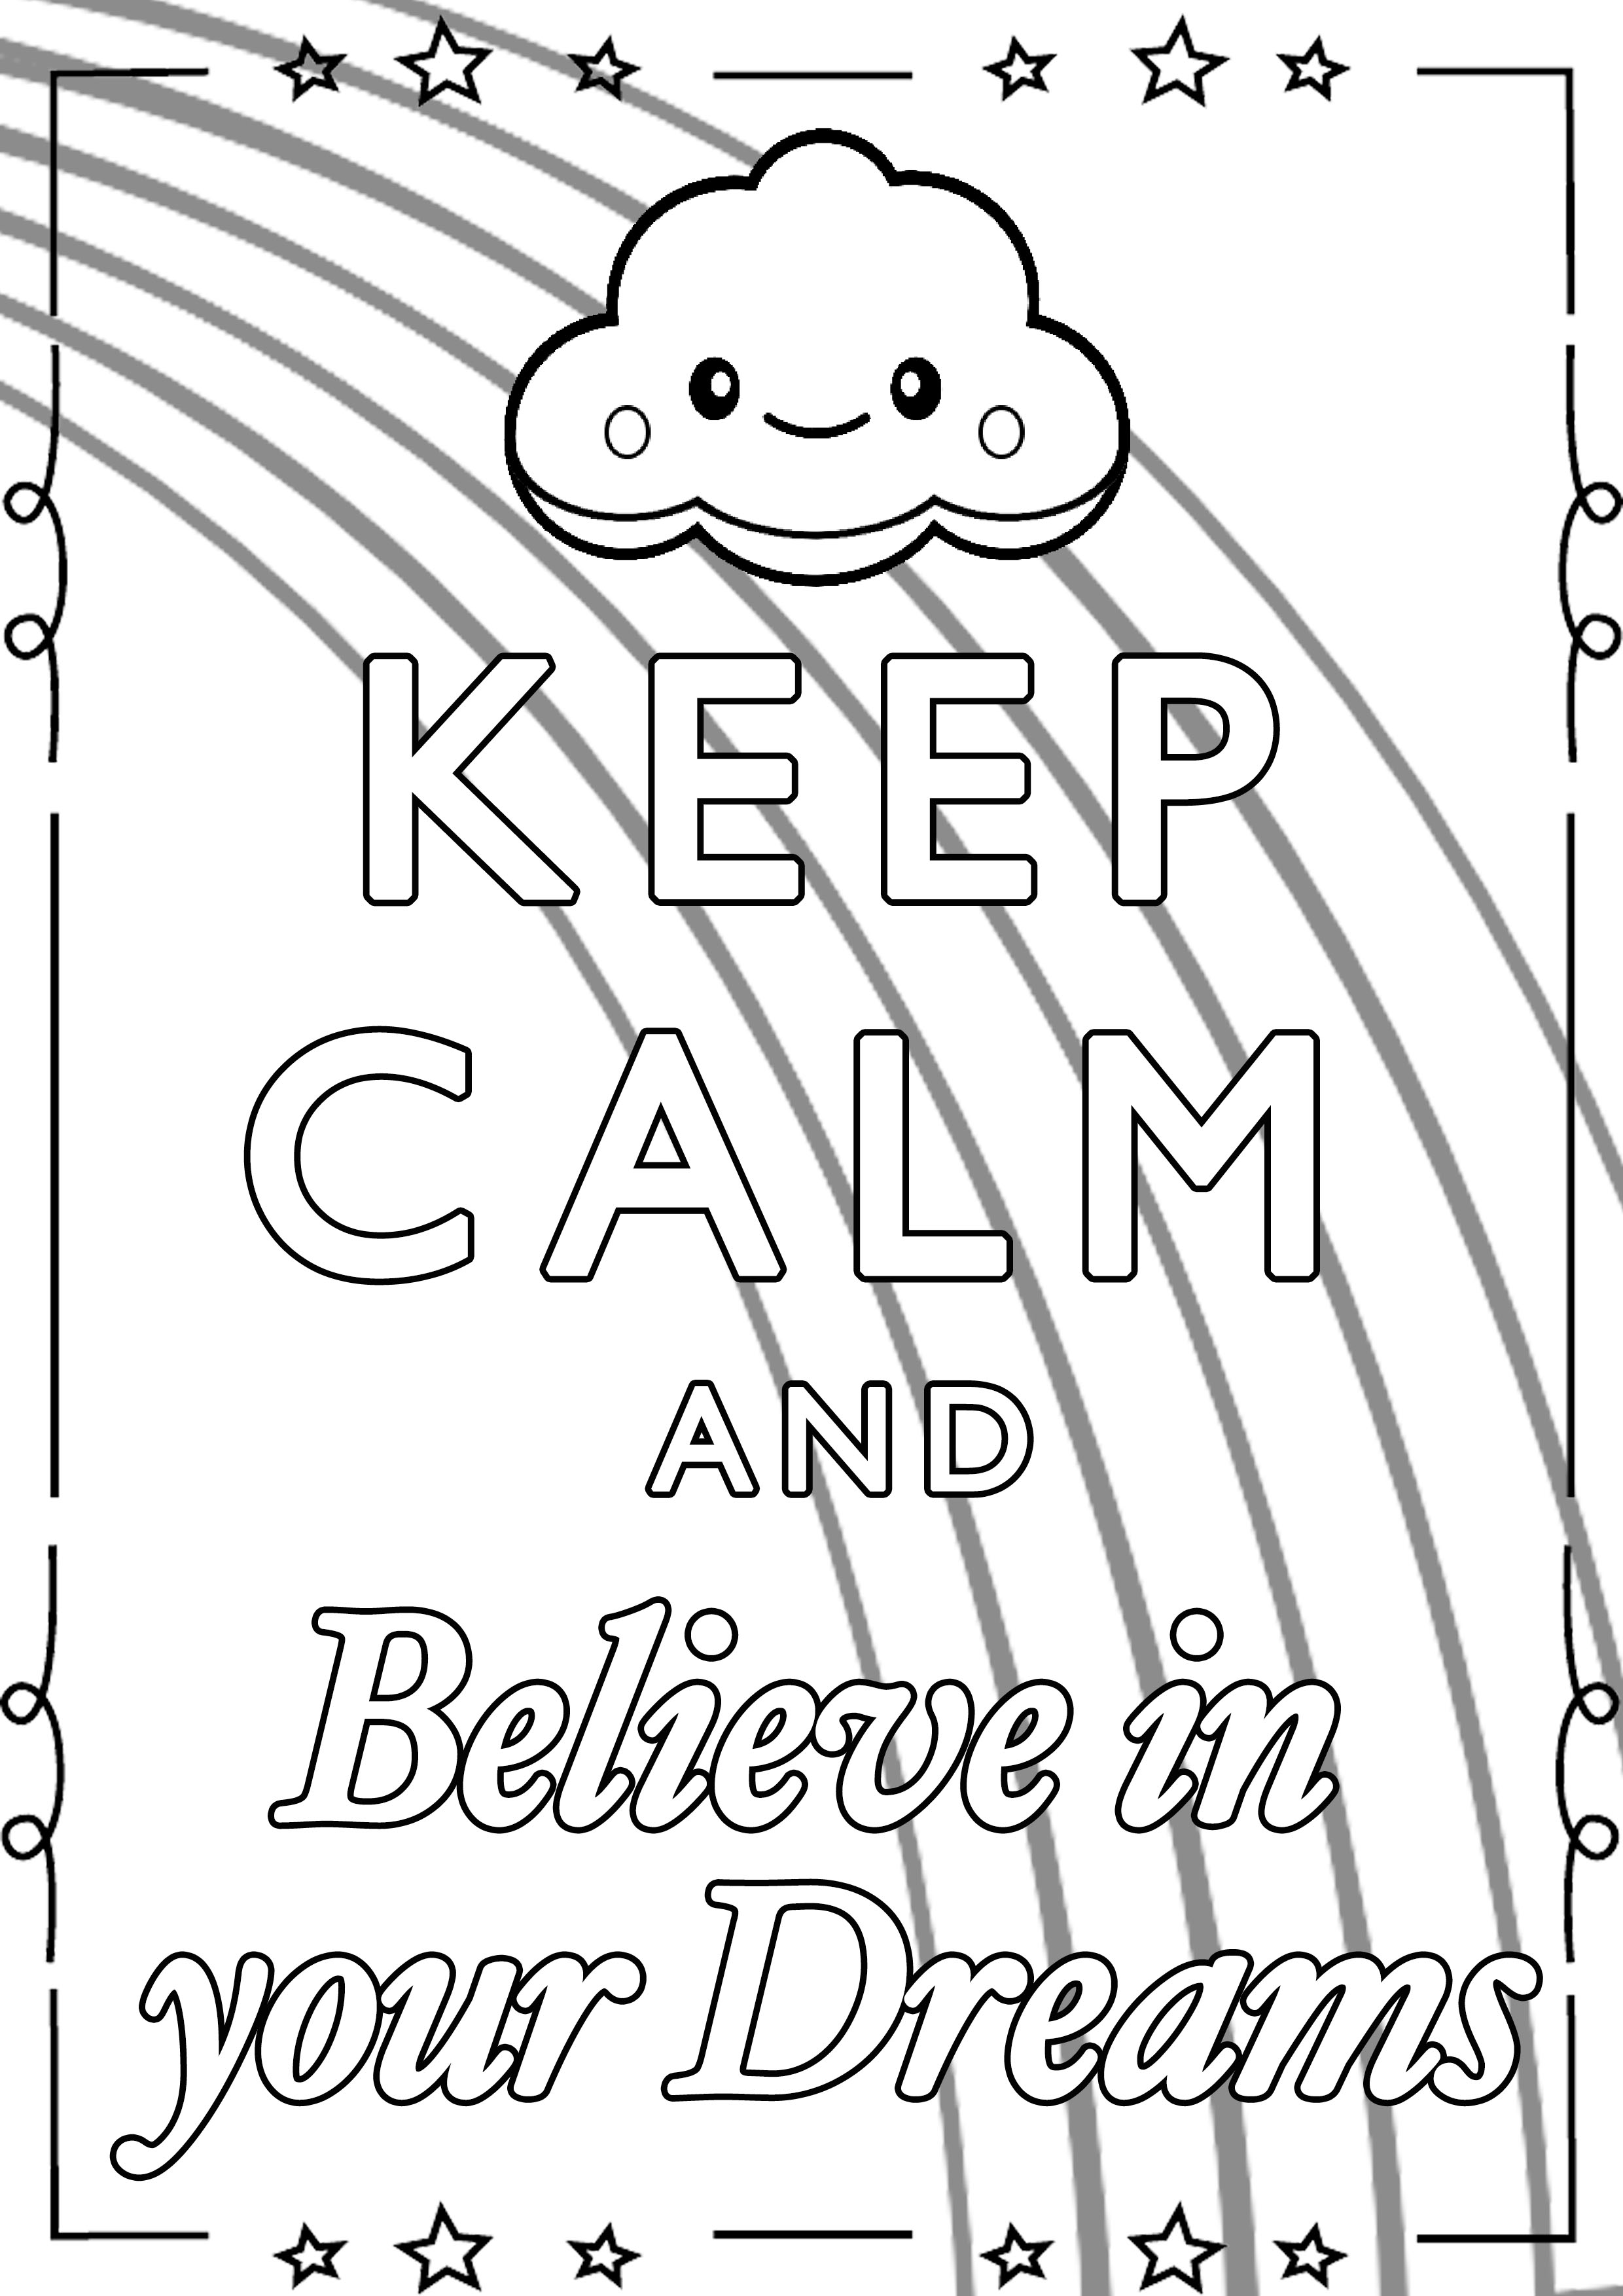 Keep calm and believe in your dreams